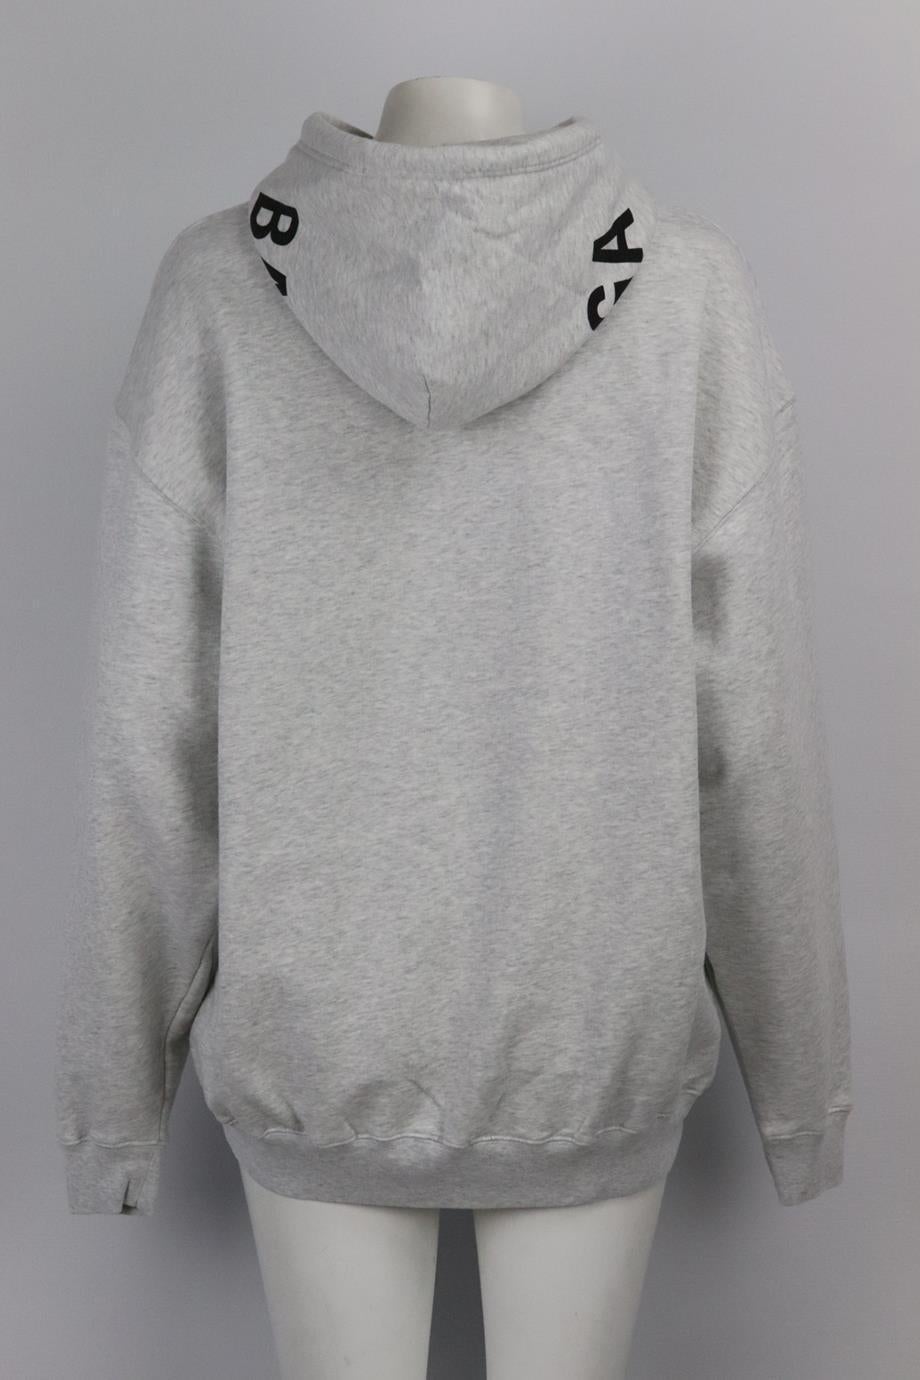 Balenciaga Oversized Printed Cotton Jersey Hoodie Large In Excellent Condition In London, GB